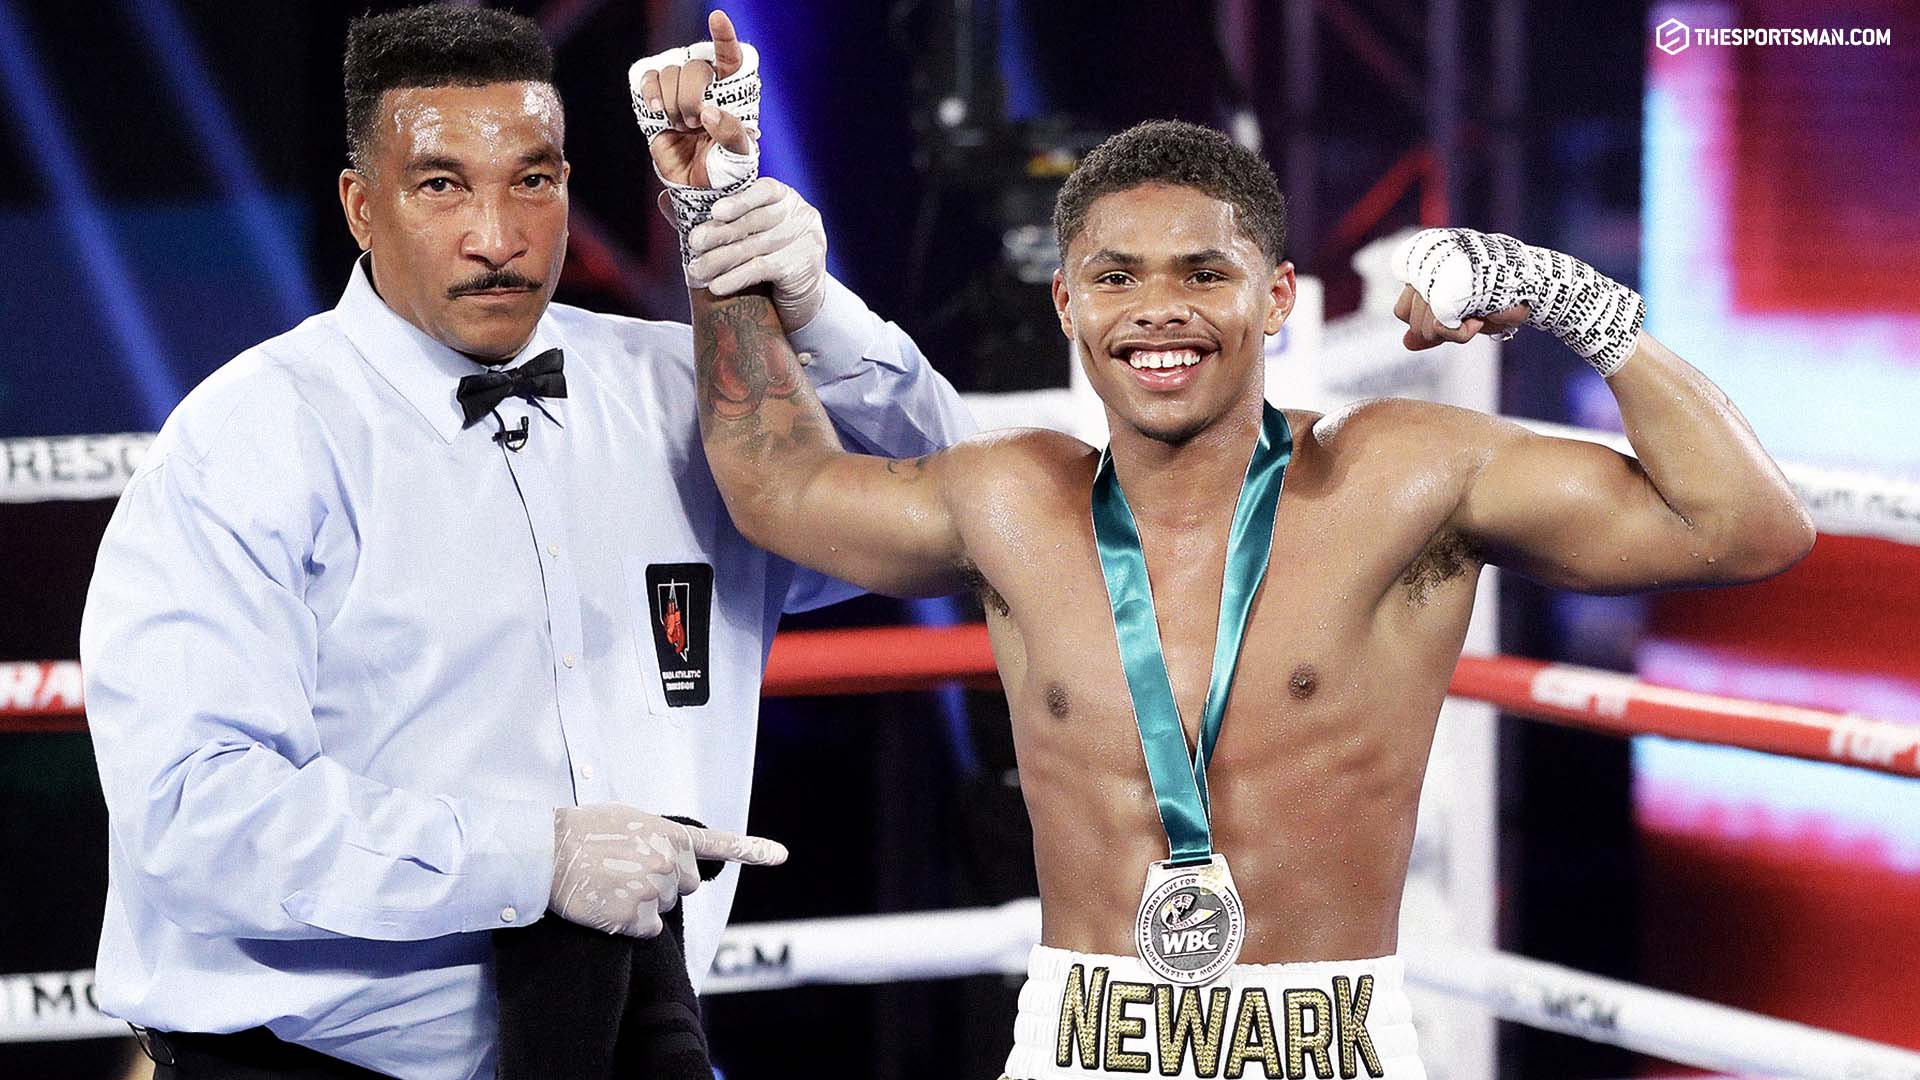 Shakur Stevenson vs Oscar Valdez Boxing Tuesday 26th April 2022 Everything You Need To Know Ahead Of Shakur Stevenson Vs Oscar Valdez